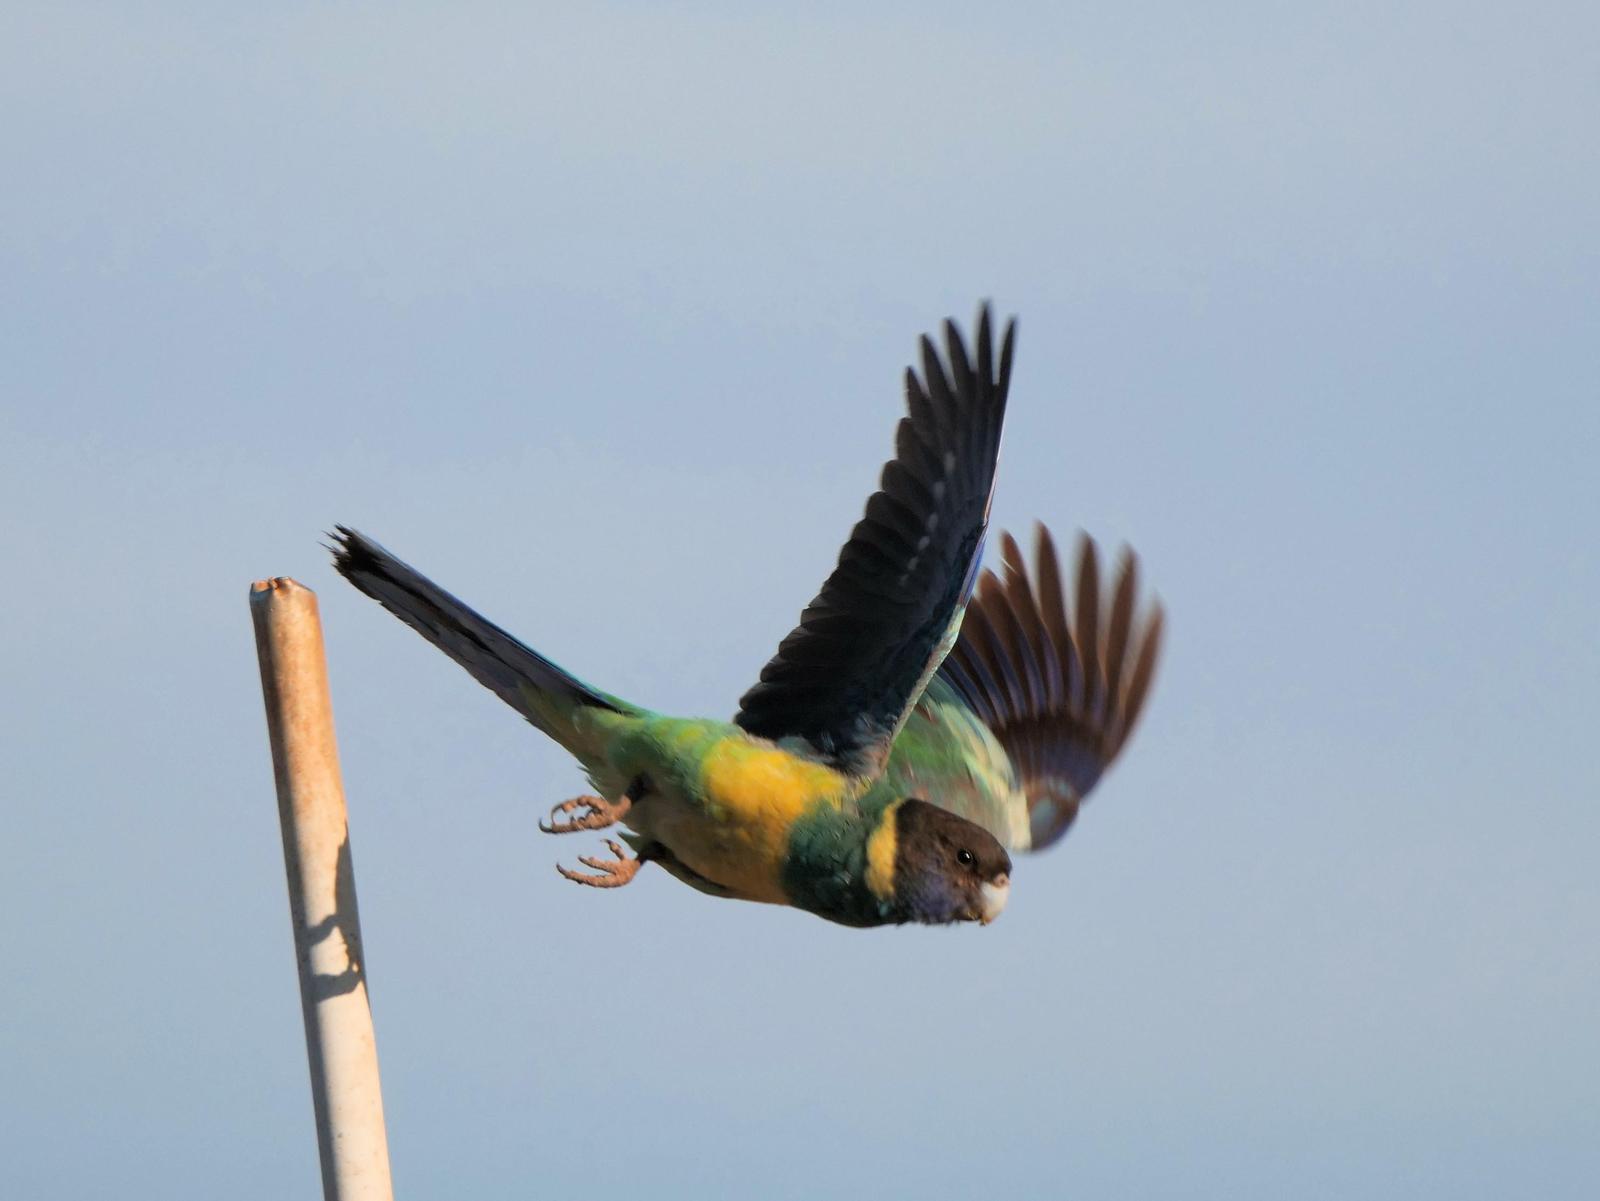 Australian Ringneck (Port Lincoln) Photo by Peter Lowe